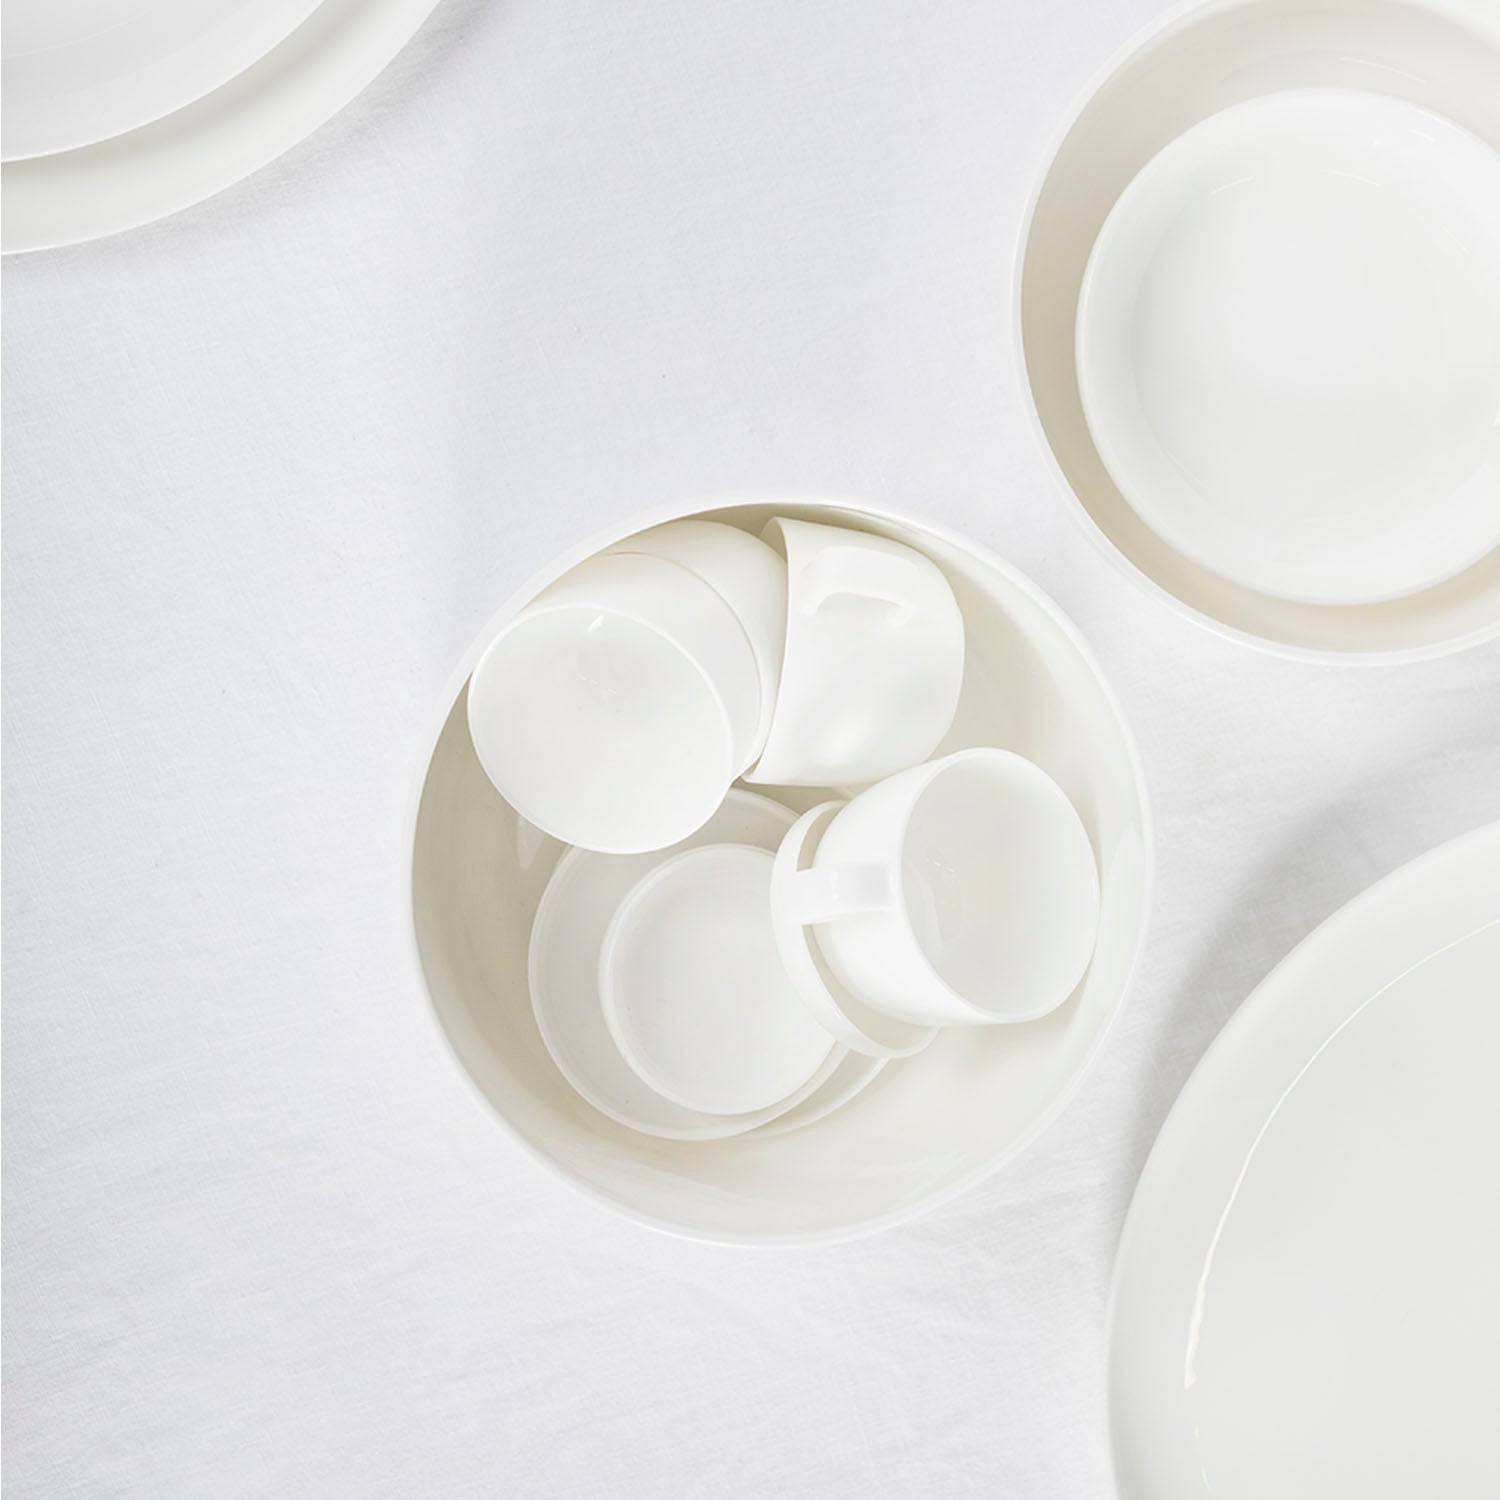 Piet Boon Base Tableware Collection-Matte White-Medium Plate (Set of 4)